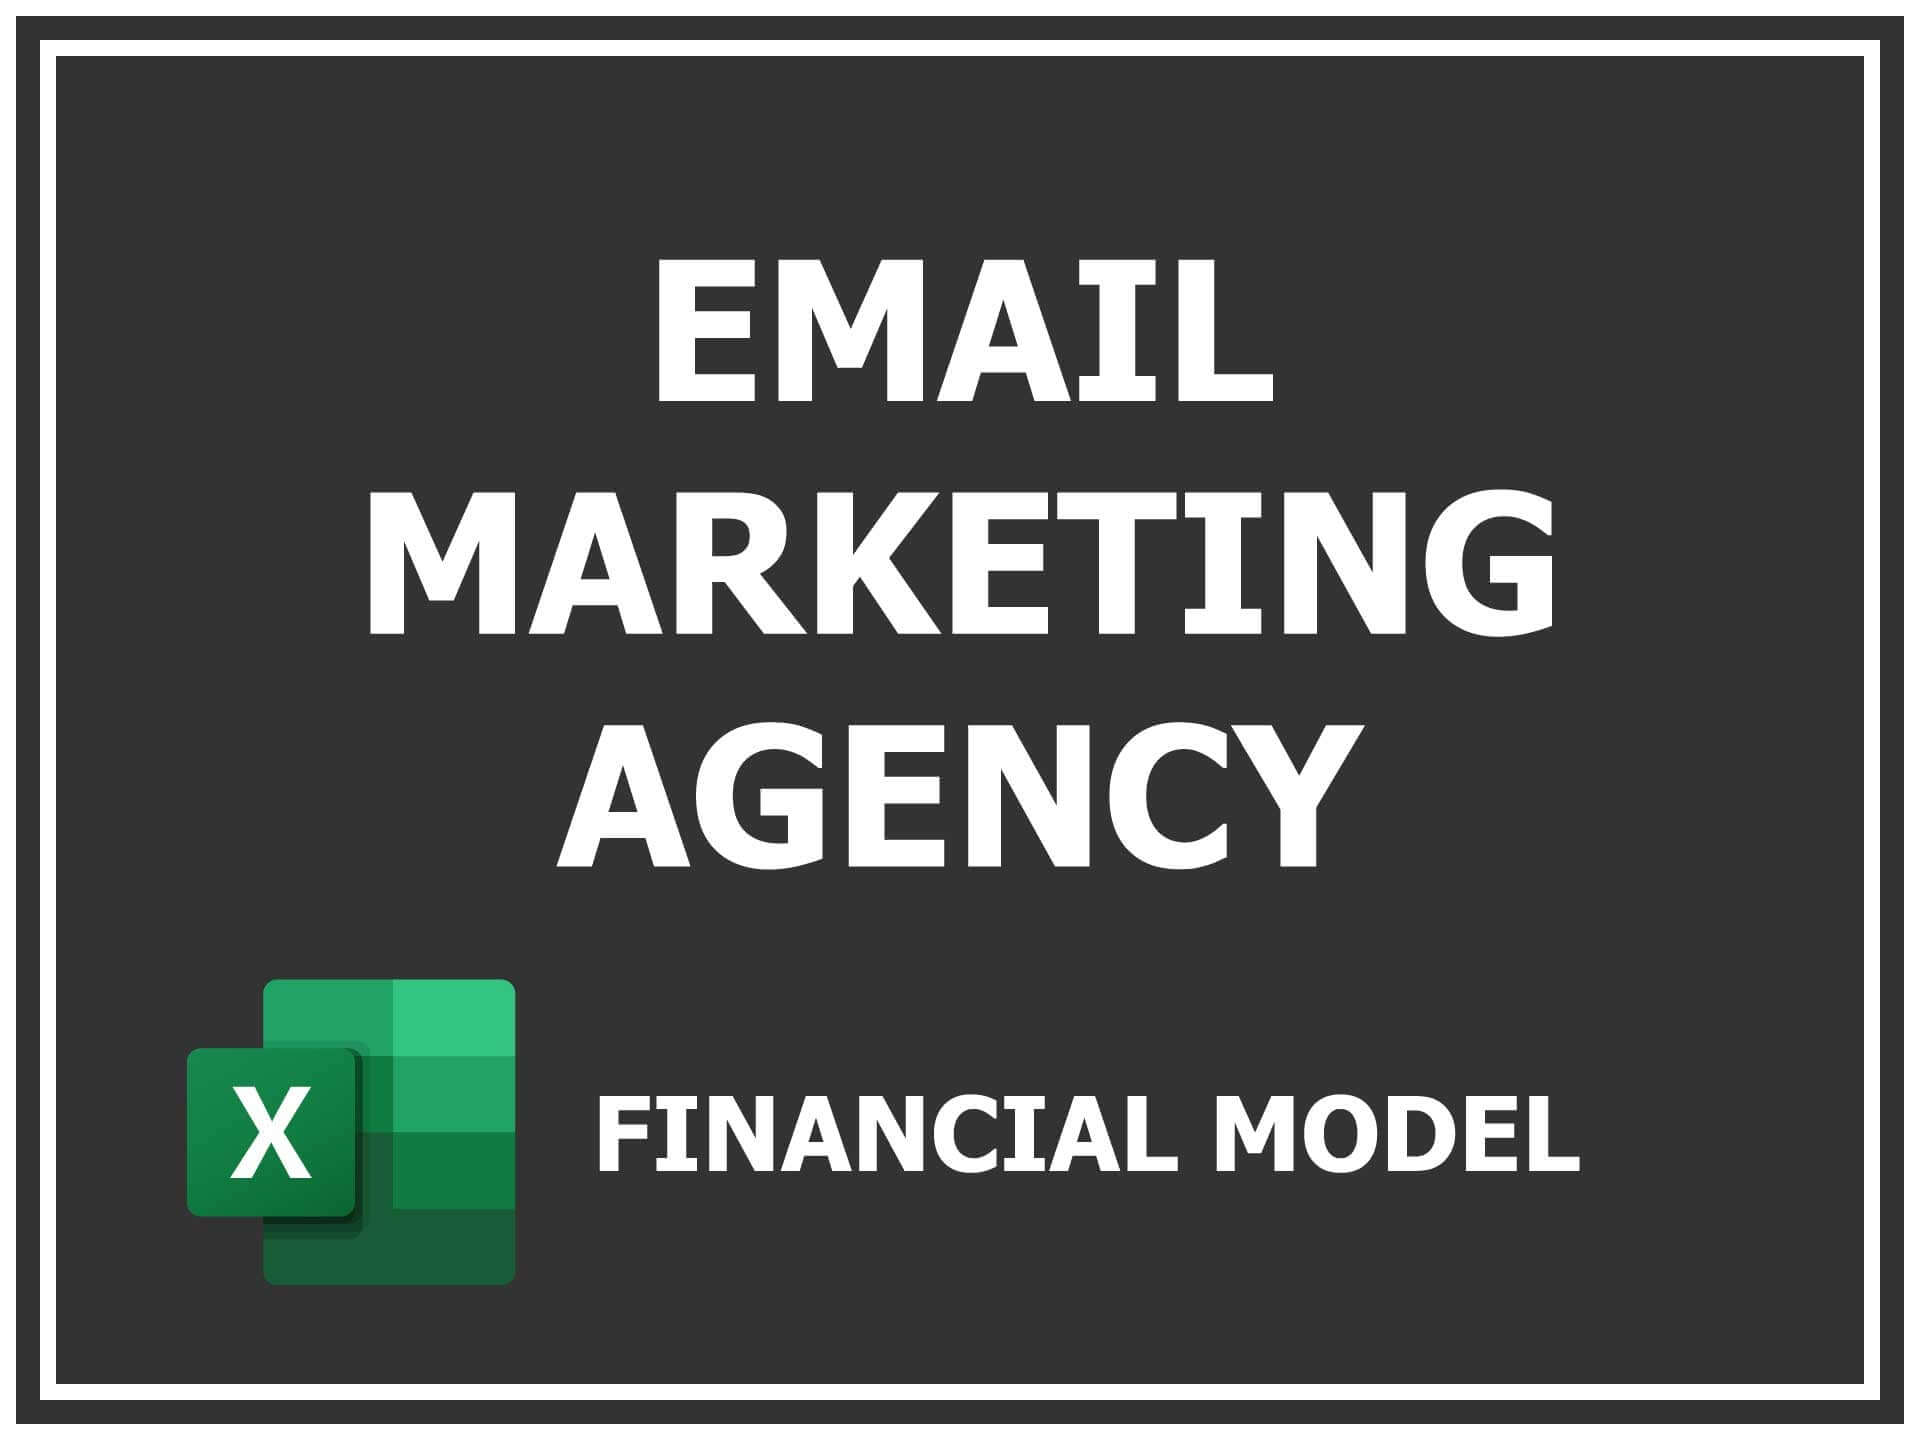 Email Marketing Agency